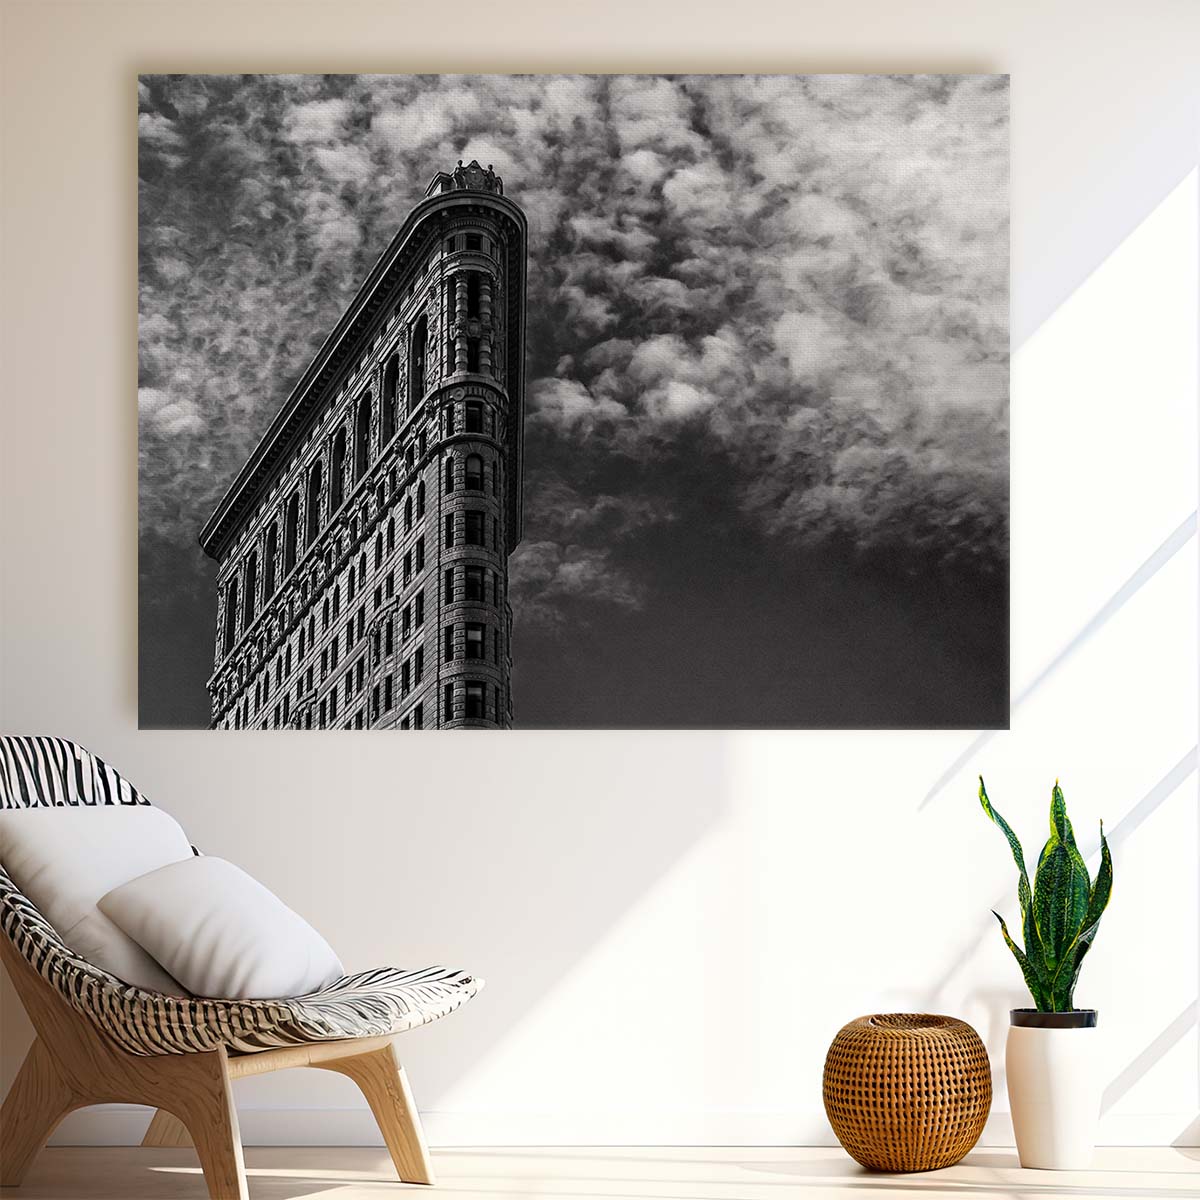 Iconic NYC Flatiron Building Monochrome Wall Art by Luxuriance Designs. Made in USA.